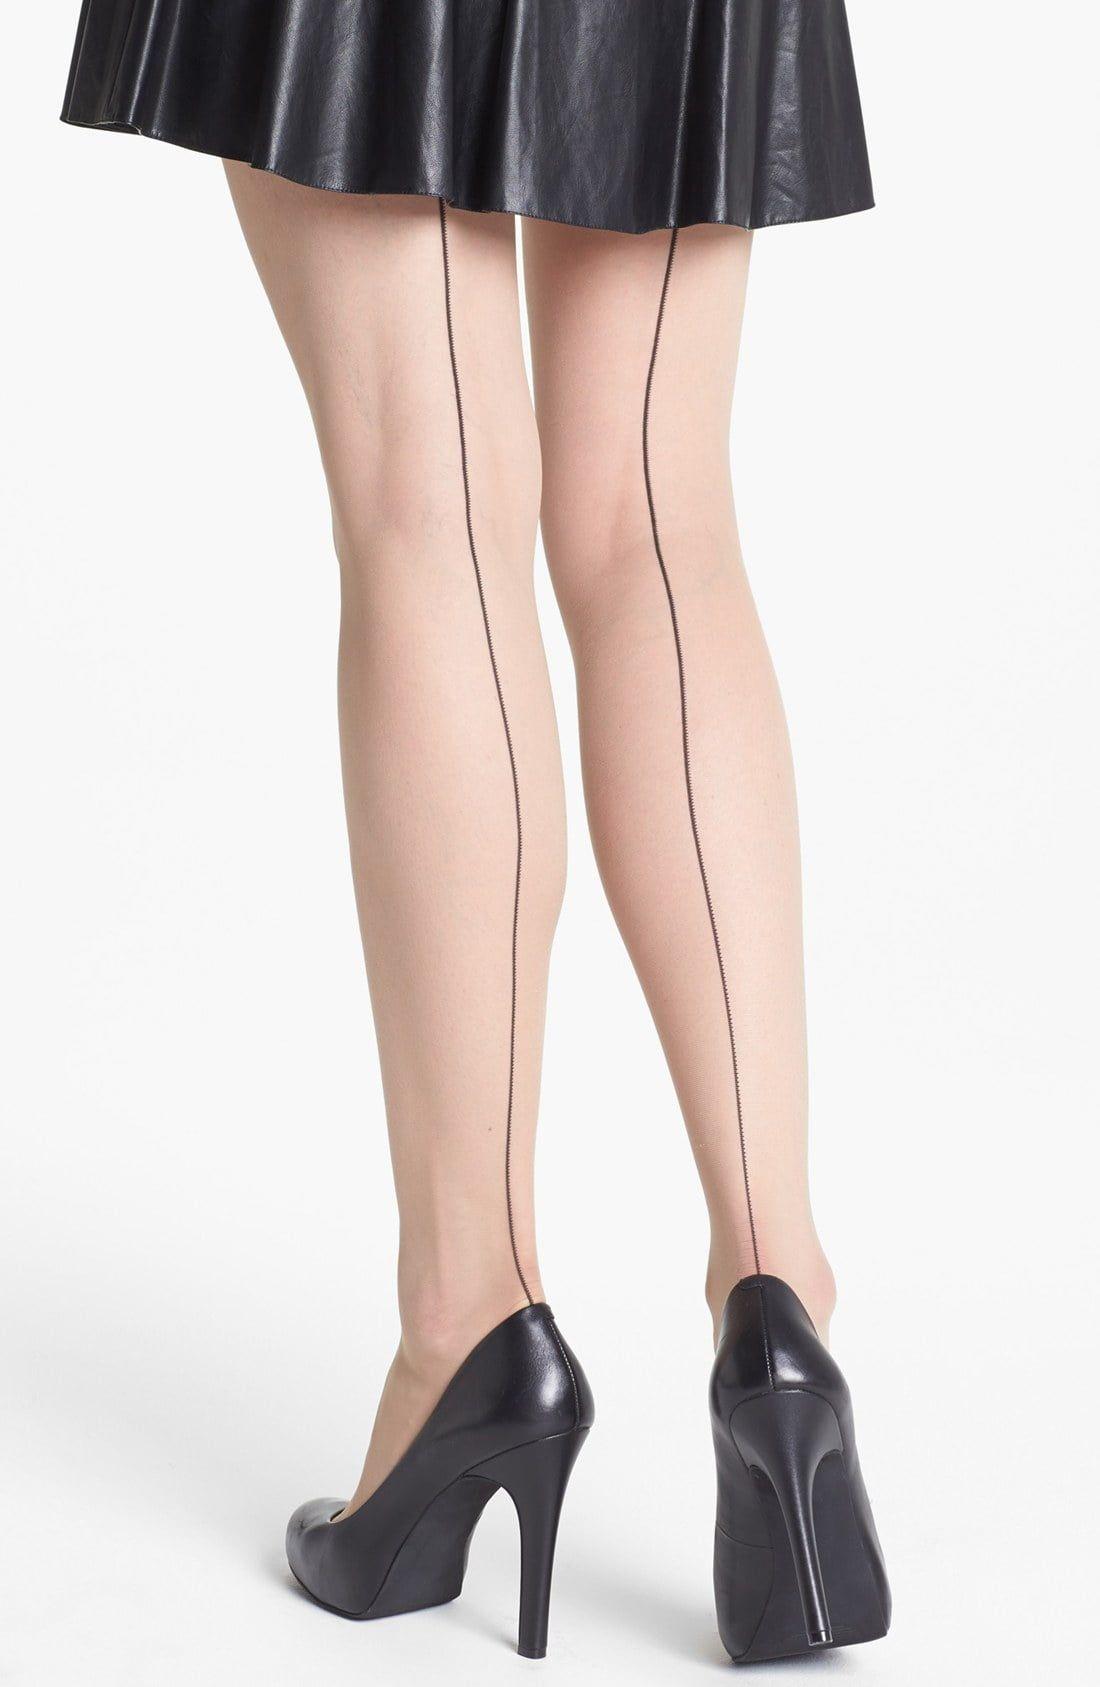 Saint reccomend Pantyhose with back seam